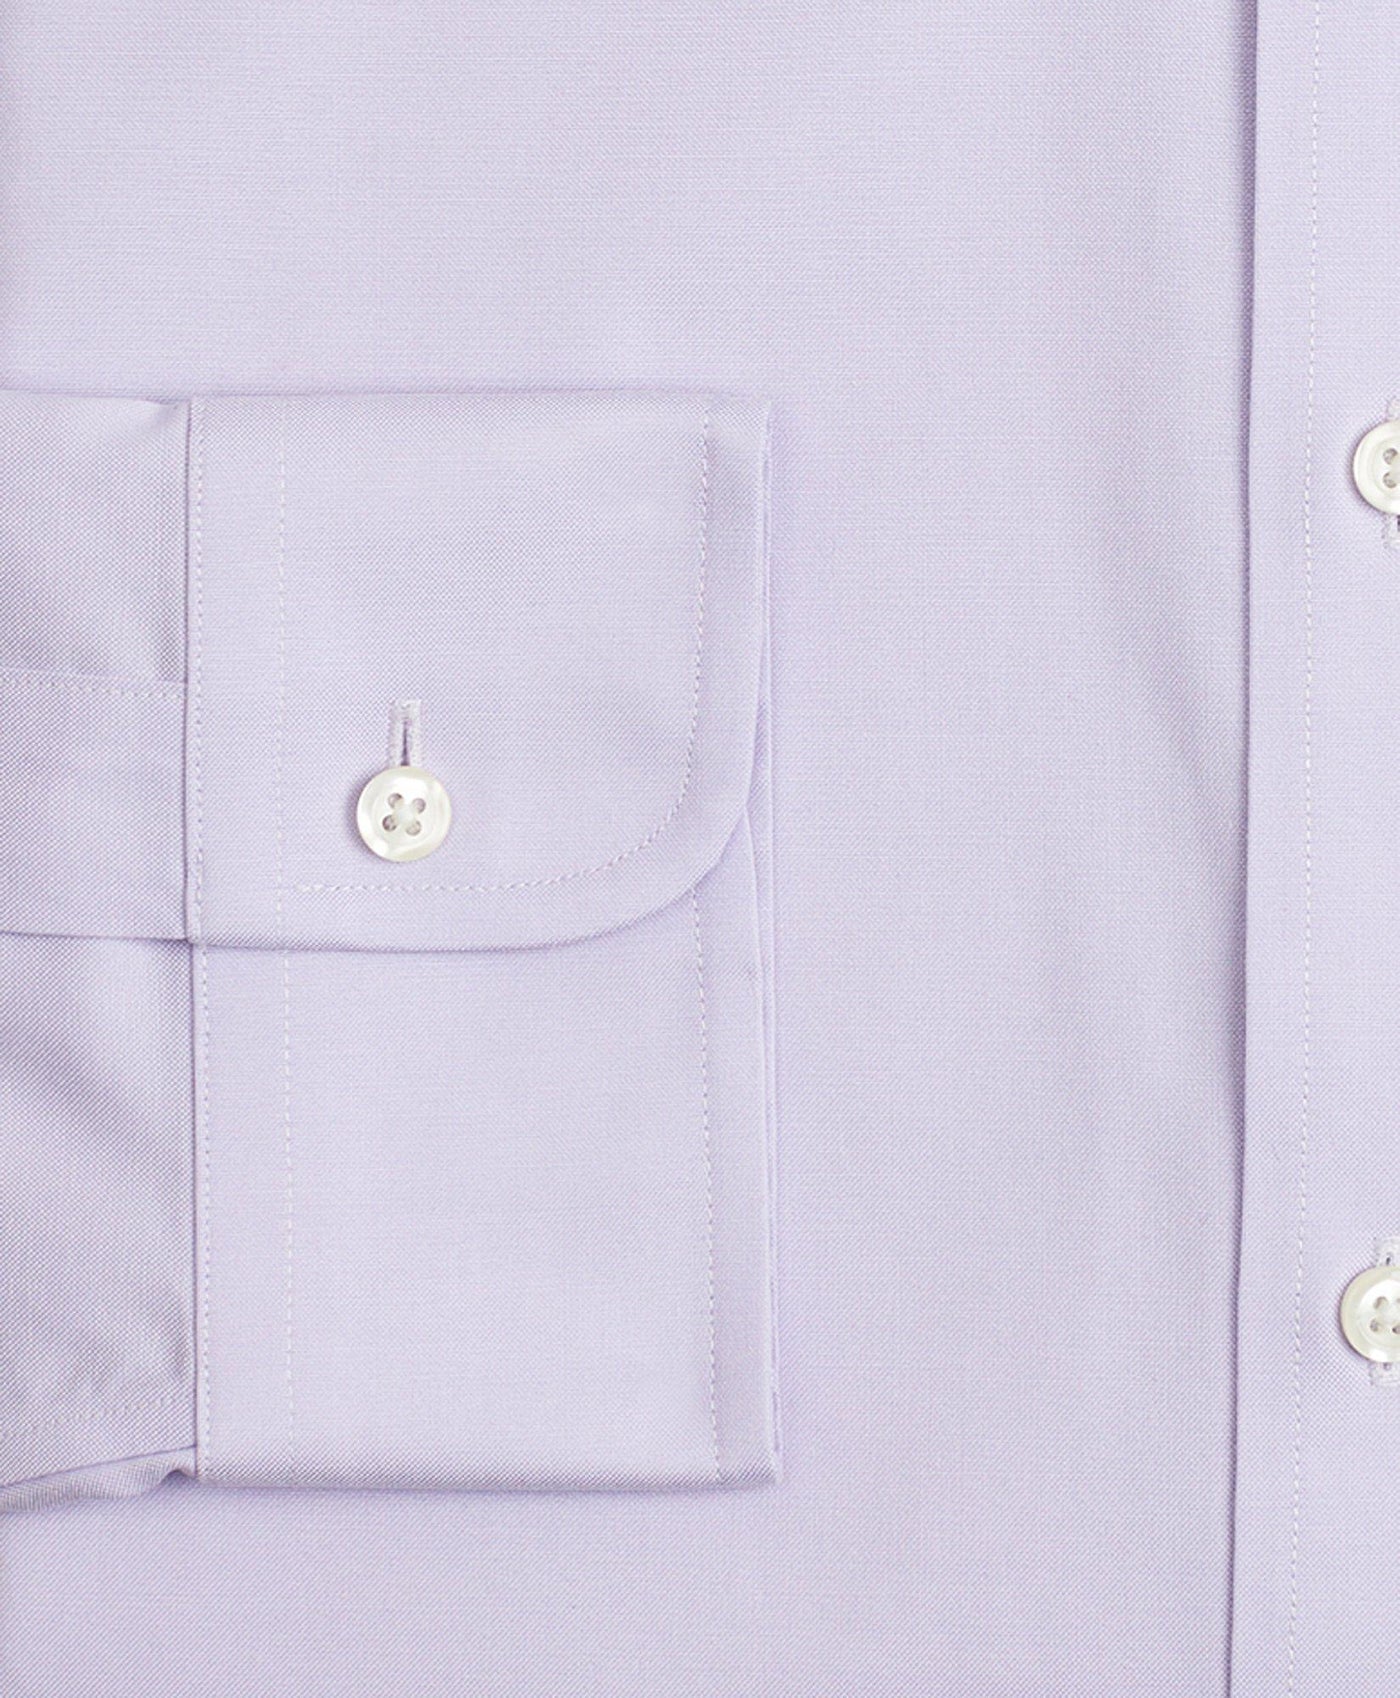 Stretch Milano Slim-Fit Dress Shirt, Non-Iron Pinpoint Ainsley Collar - Brooks Brothers Canada